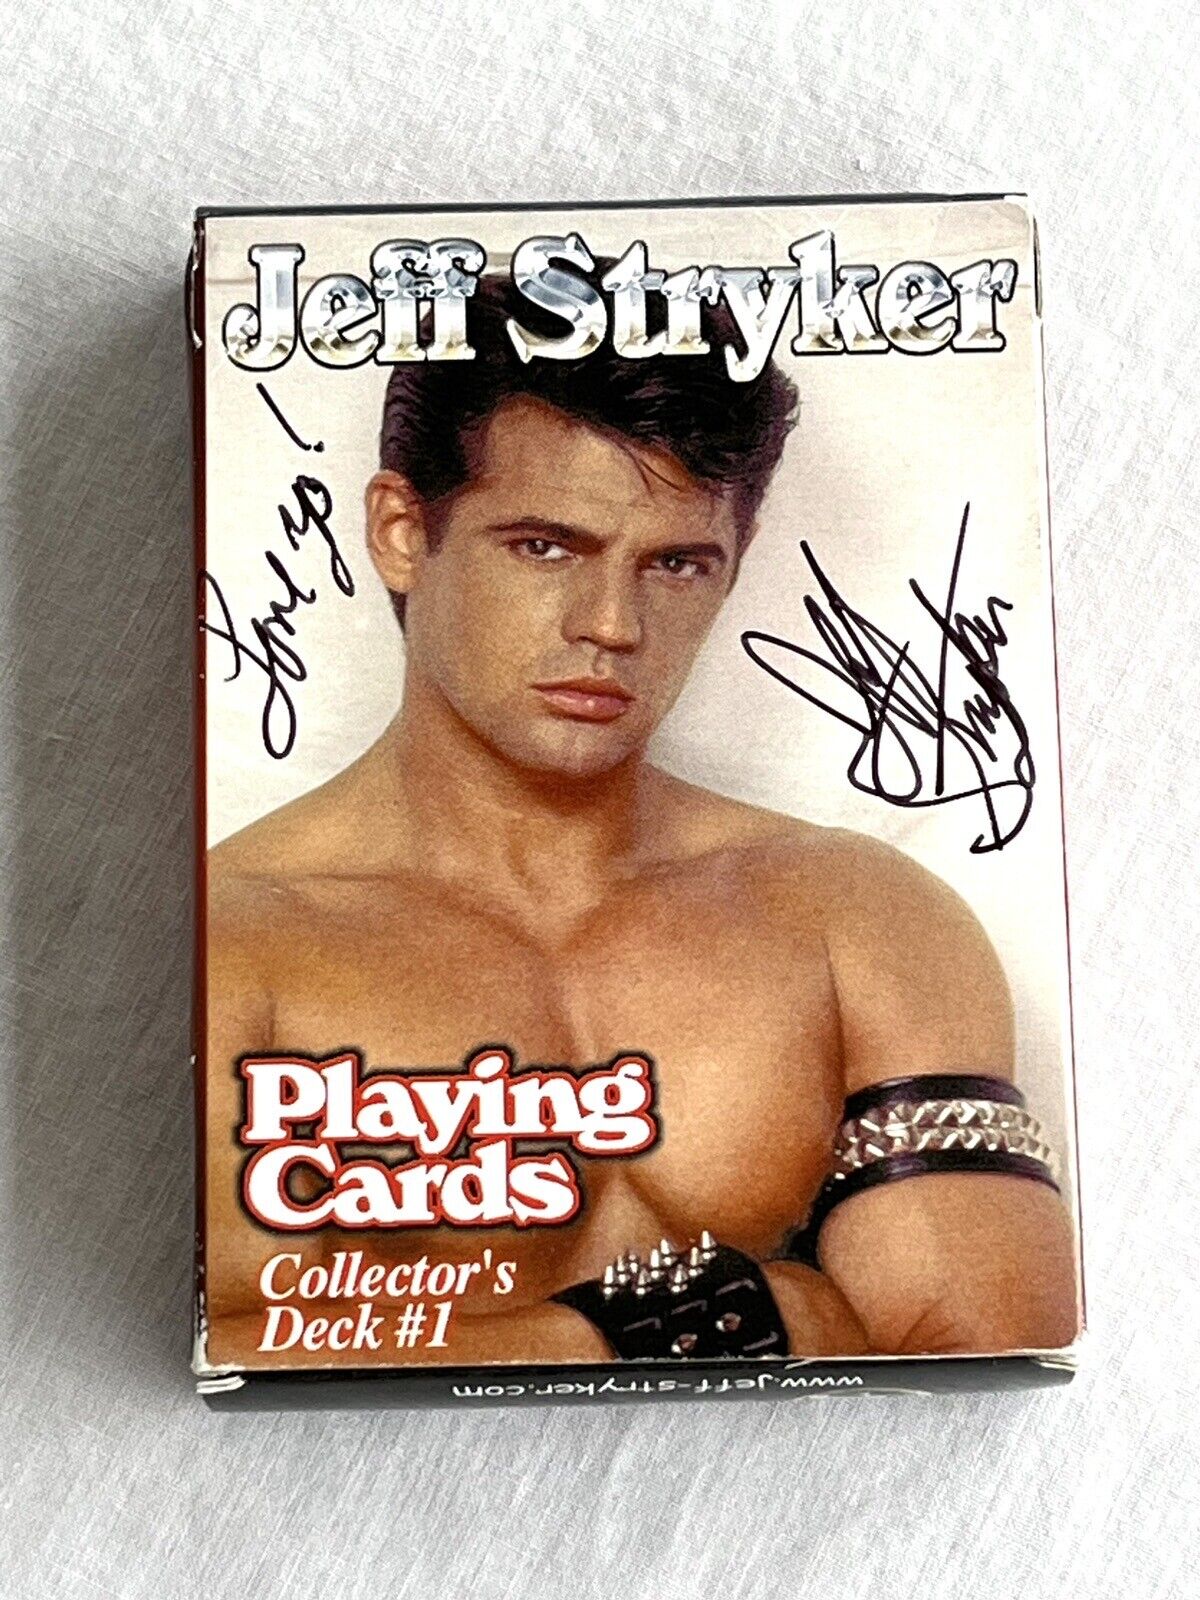 JEFF STRYKER - 54 Playing Cards Deck - Signed Autographed